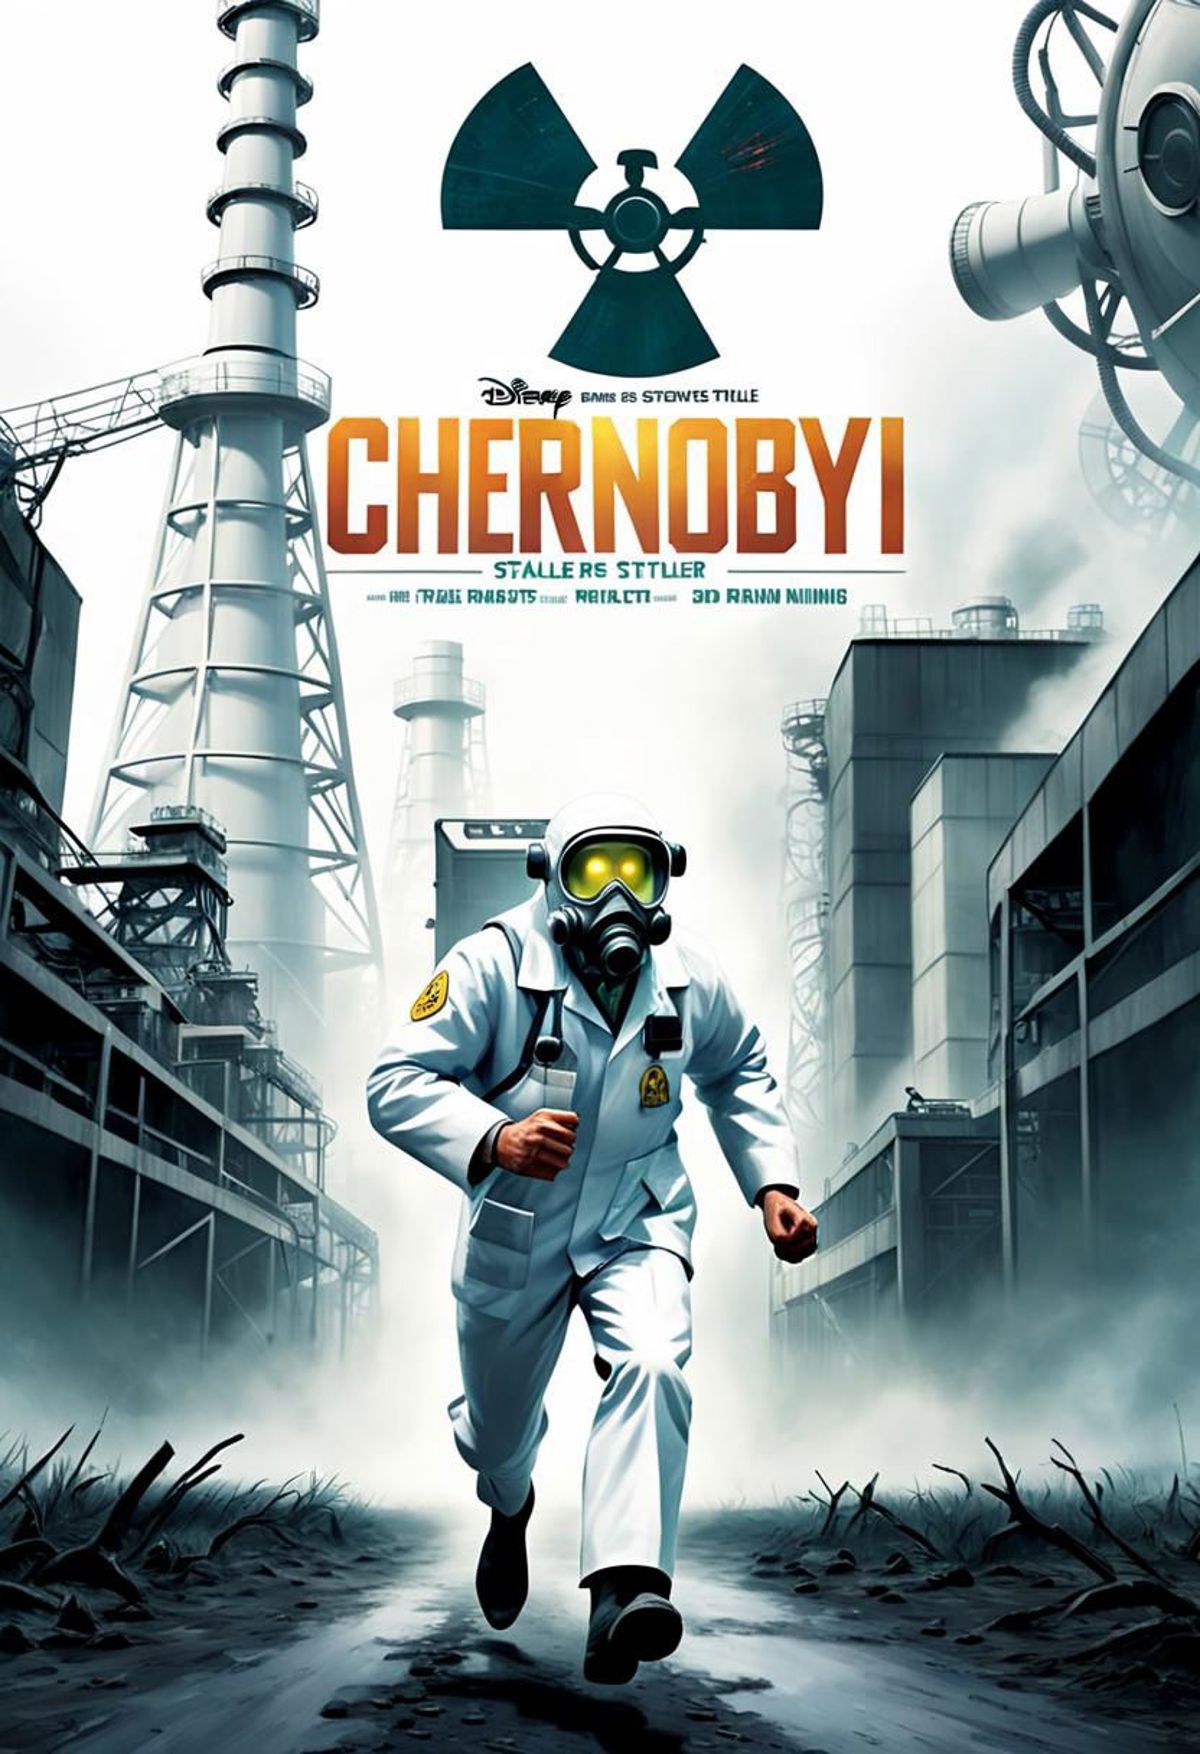 A poster of a man in a gas mask running in a chemical plant.